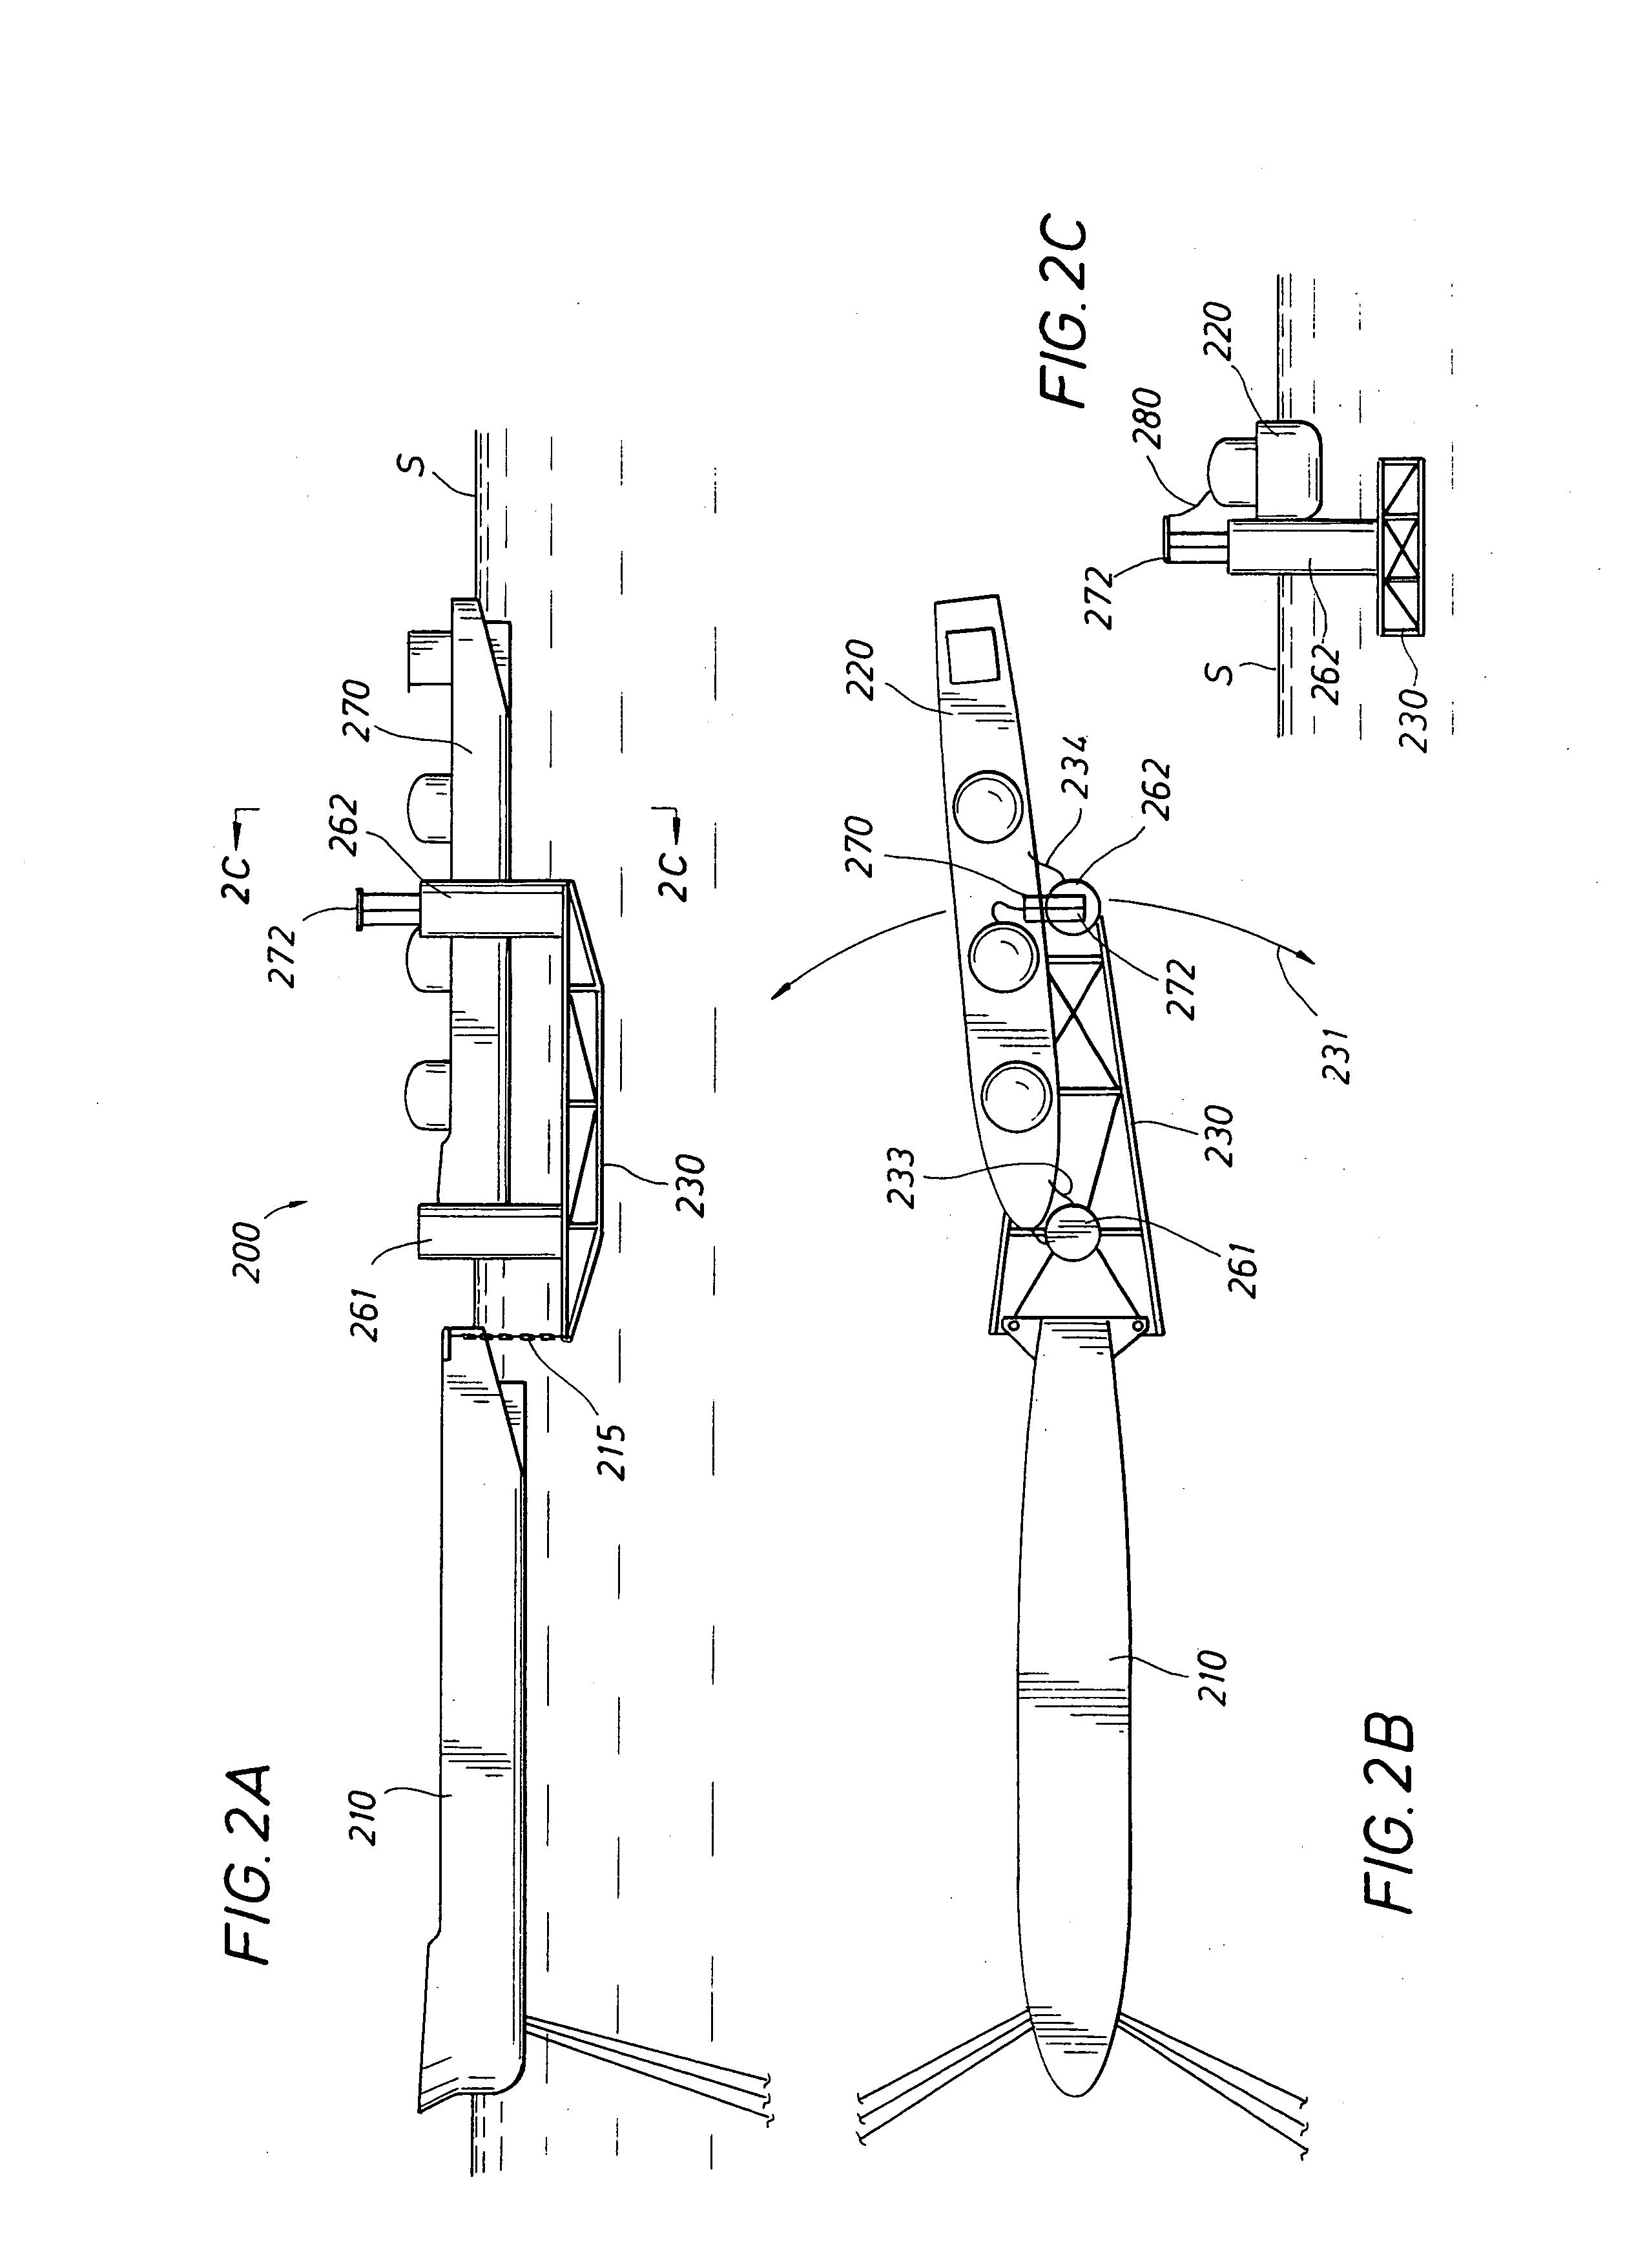 Offloading arrangements and method for spread moored FPSOs